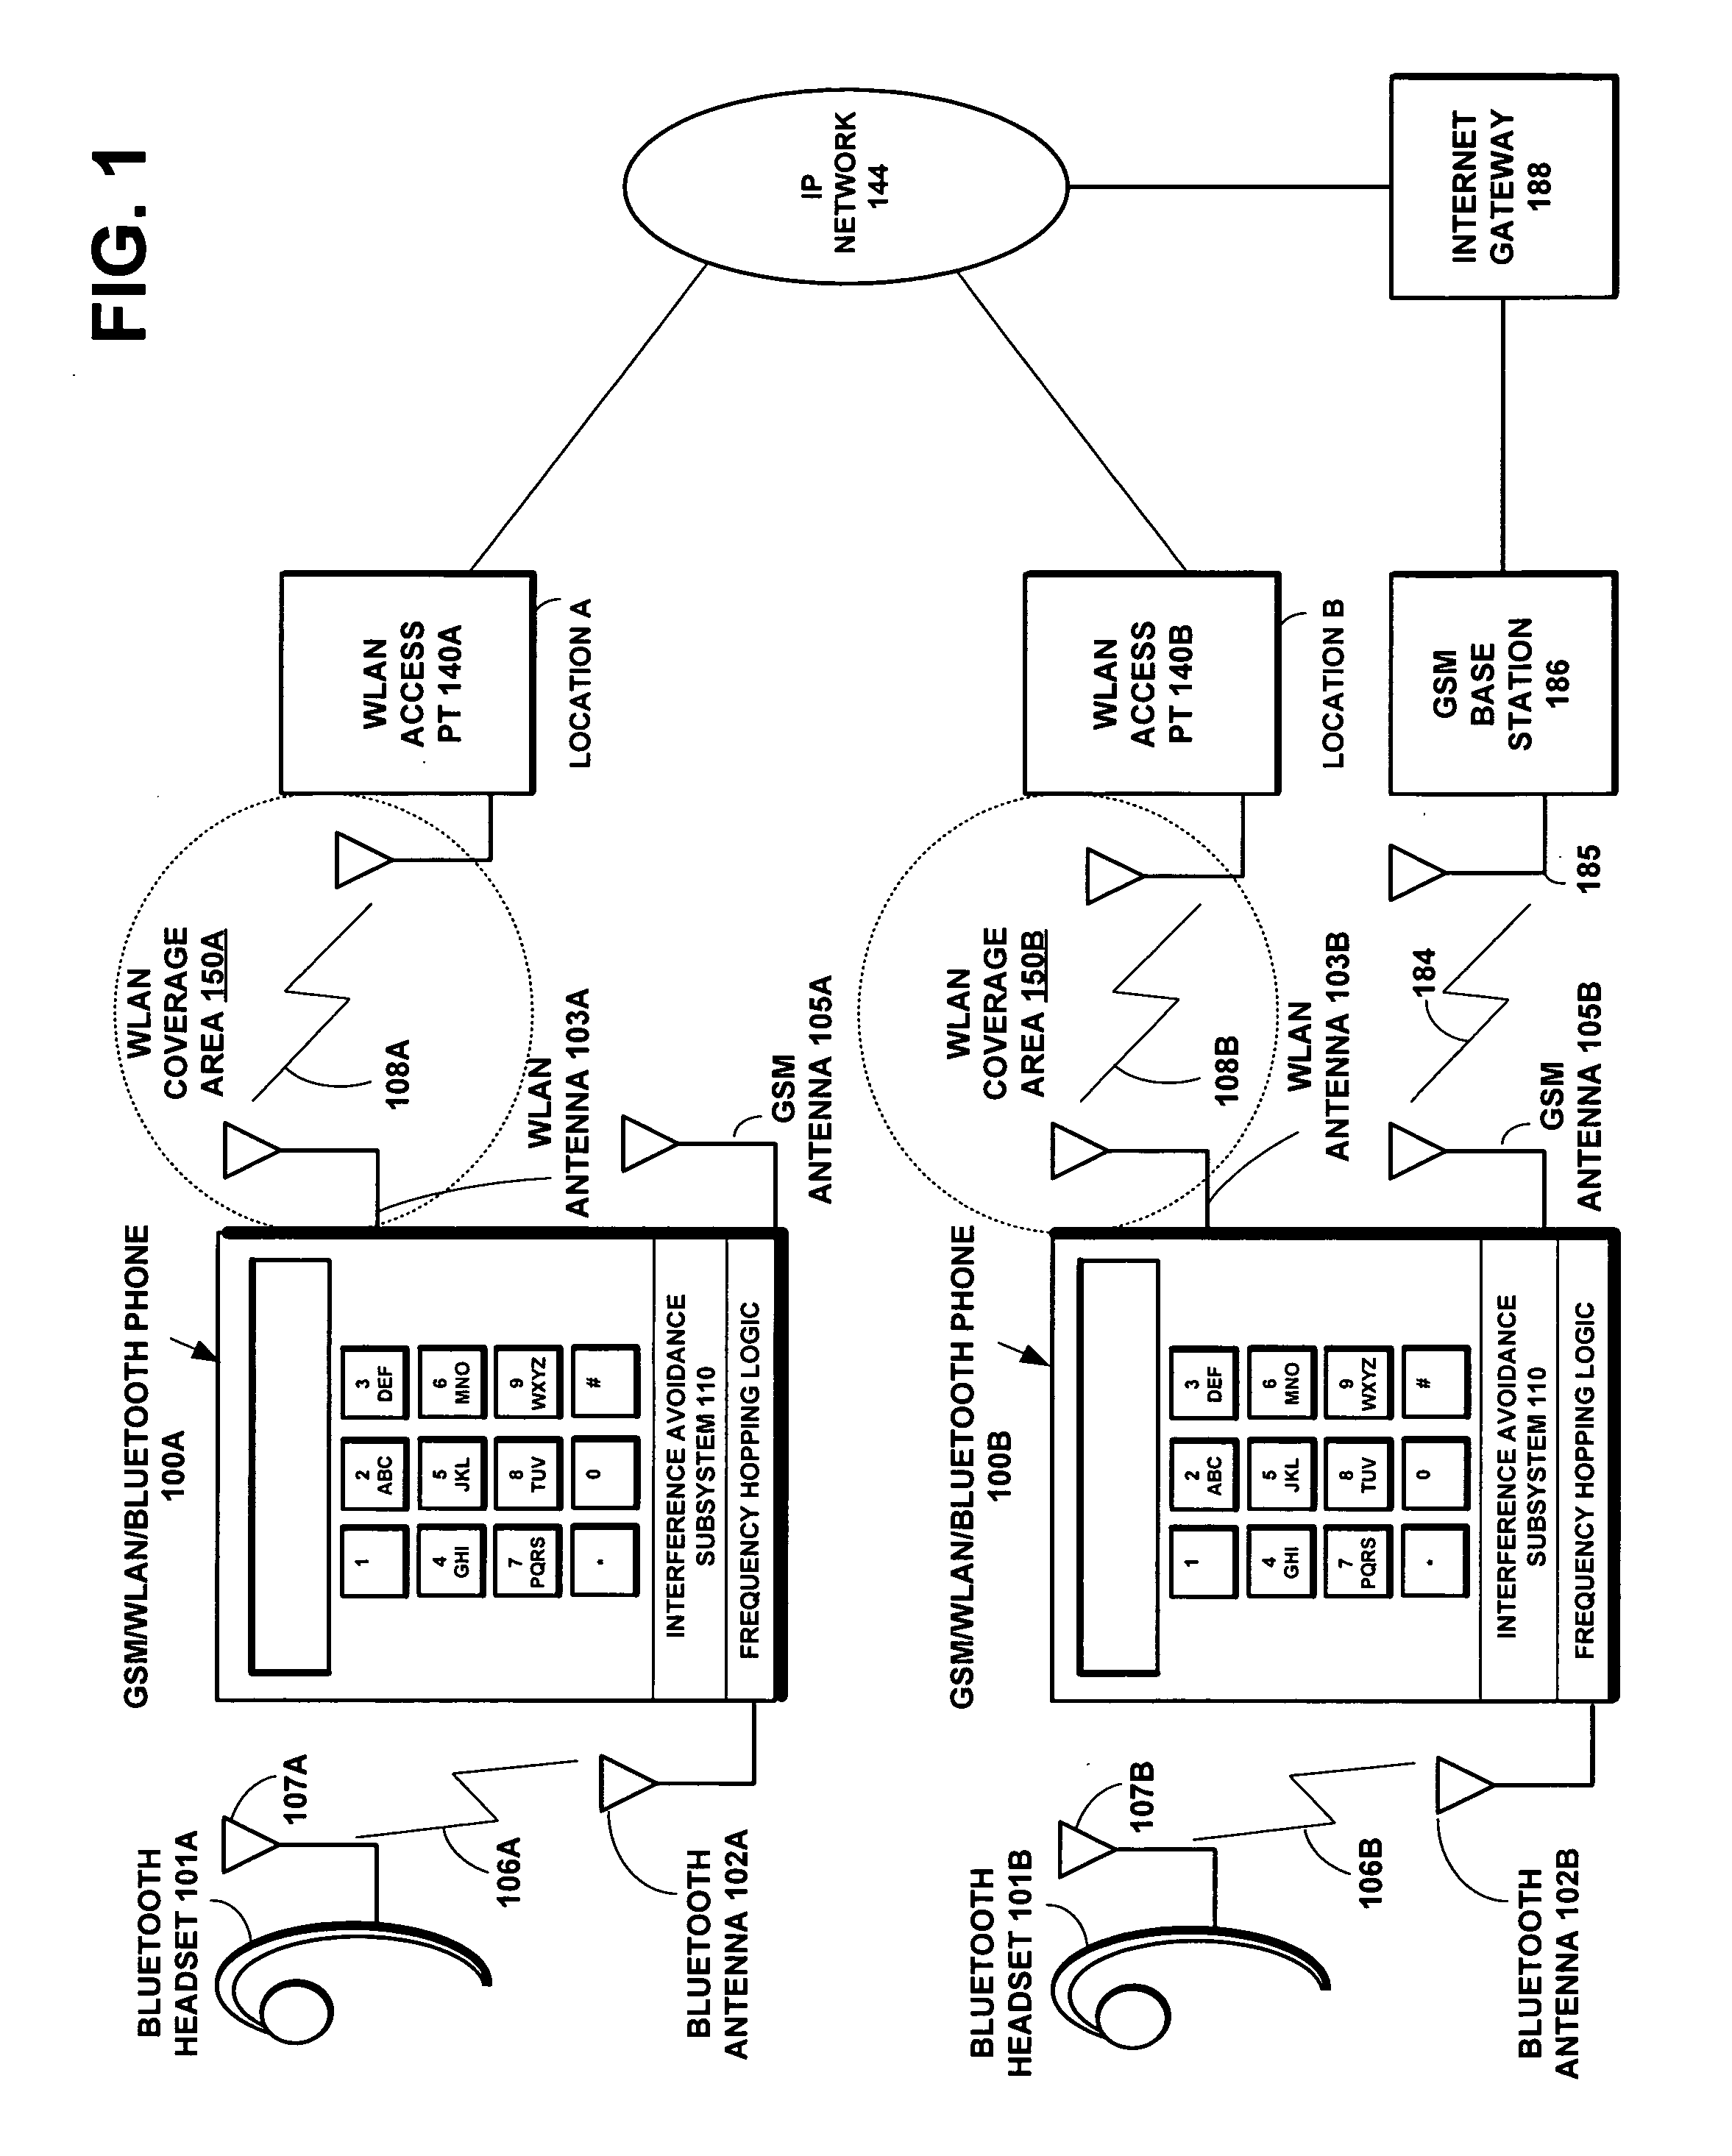 Method for avoiding interference from a cellular transmitter to the 2.4/5GHz ISM band